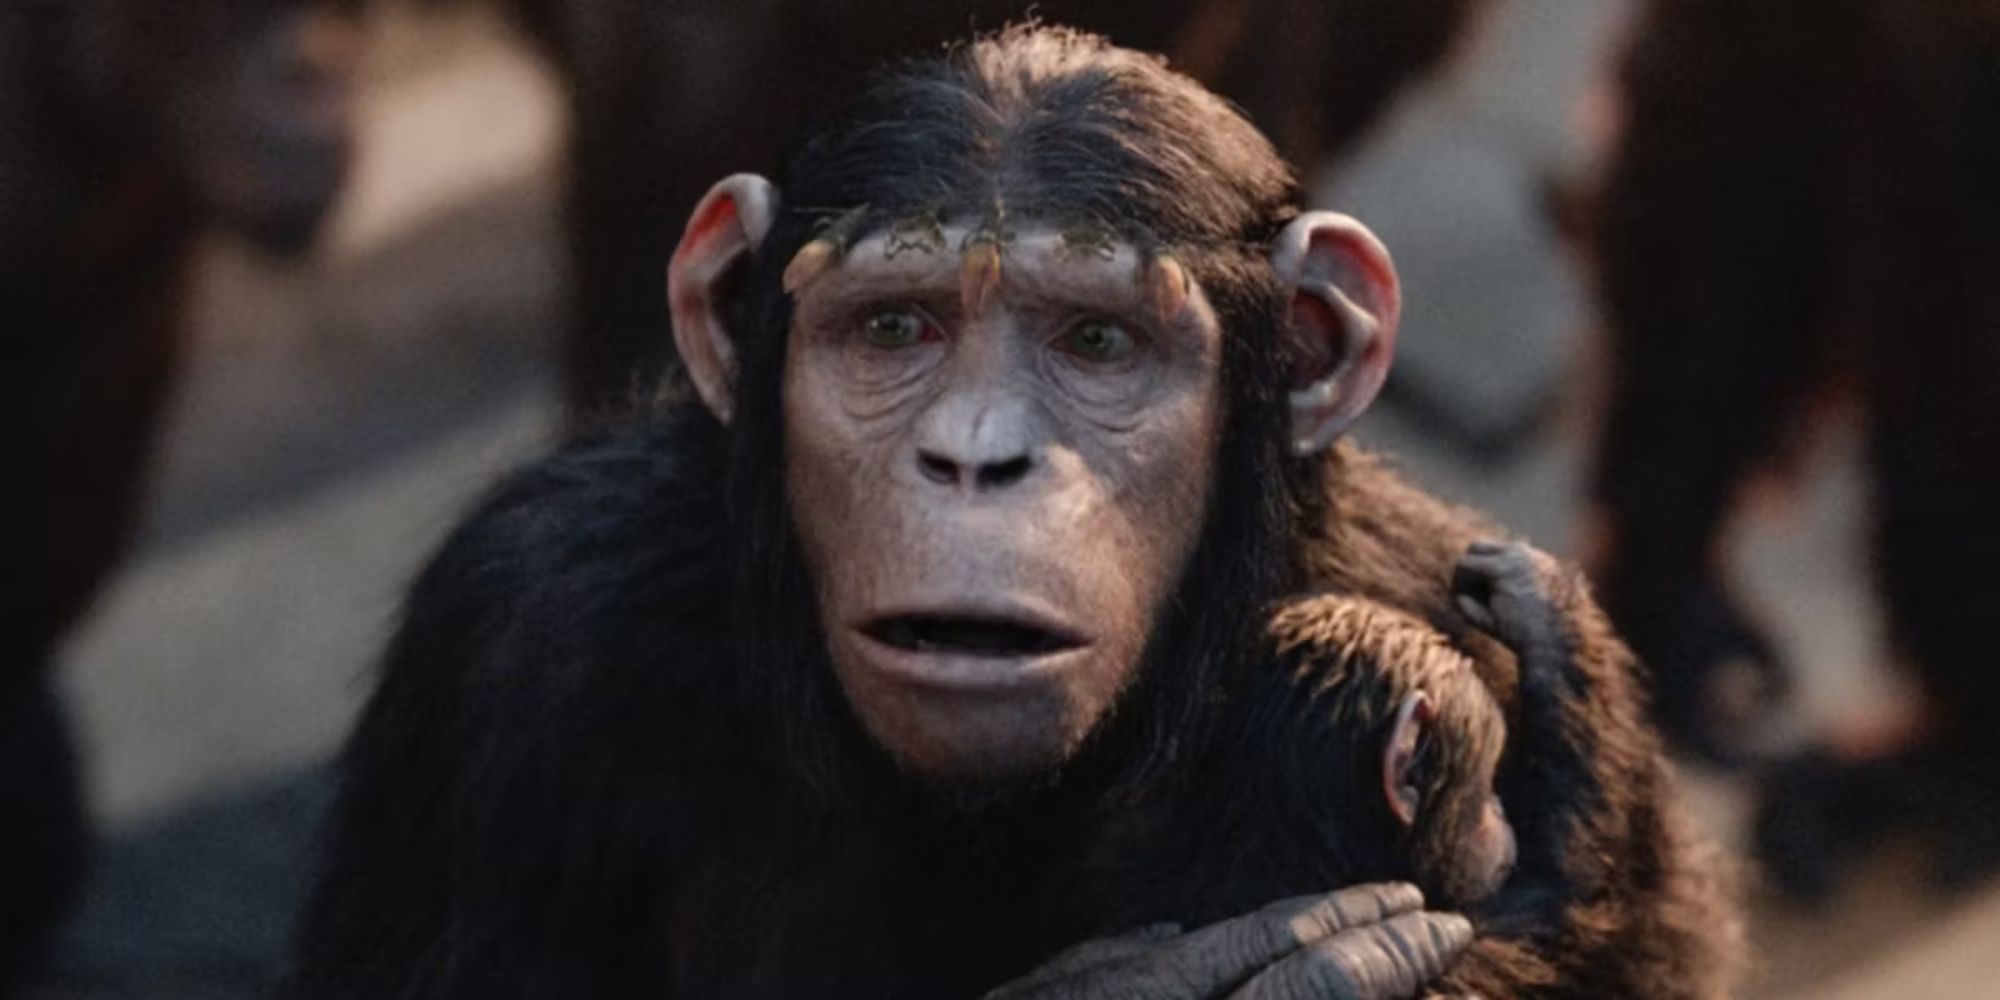 Judy Greer as Cornelia, Caesar's wife, holding their baby in The Dawn of the Planet of the Apes